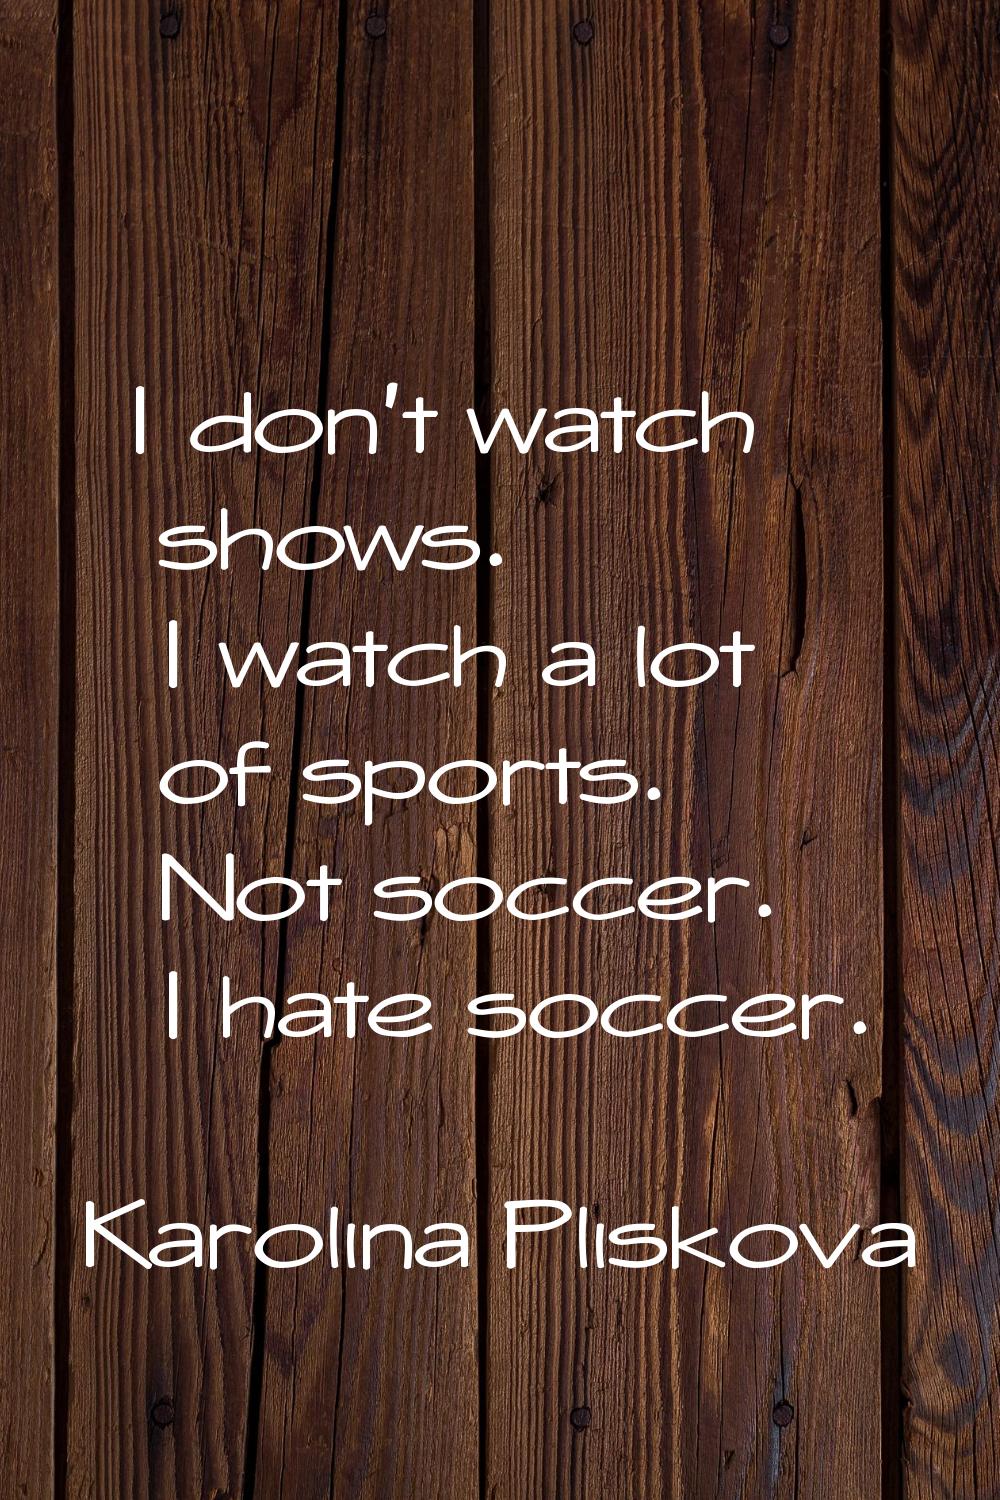 I don't watch shows. I watch a lot of sports. Not soccer. I hate soccer.